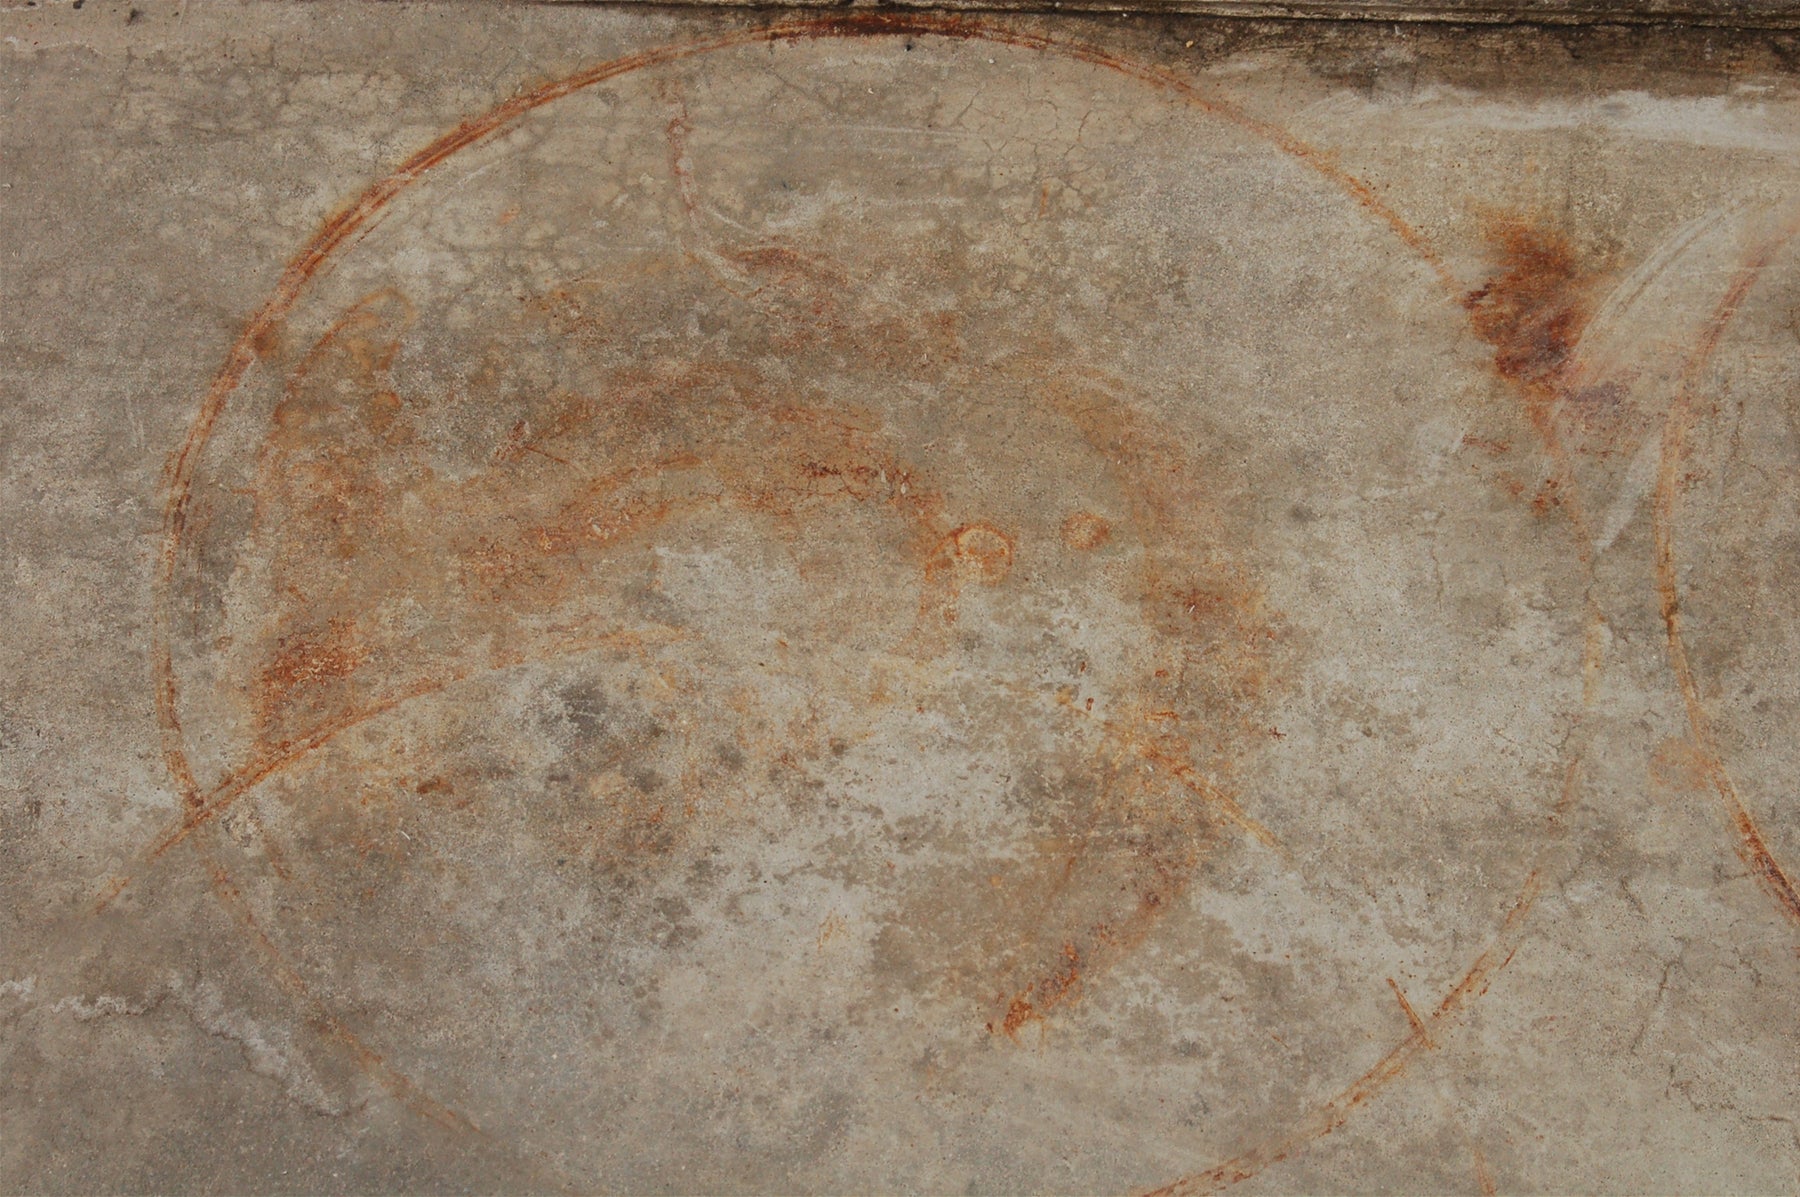 Rust Ring on Concrete